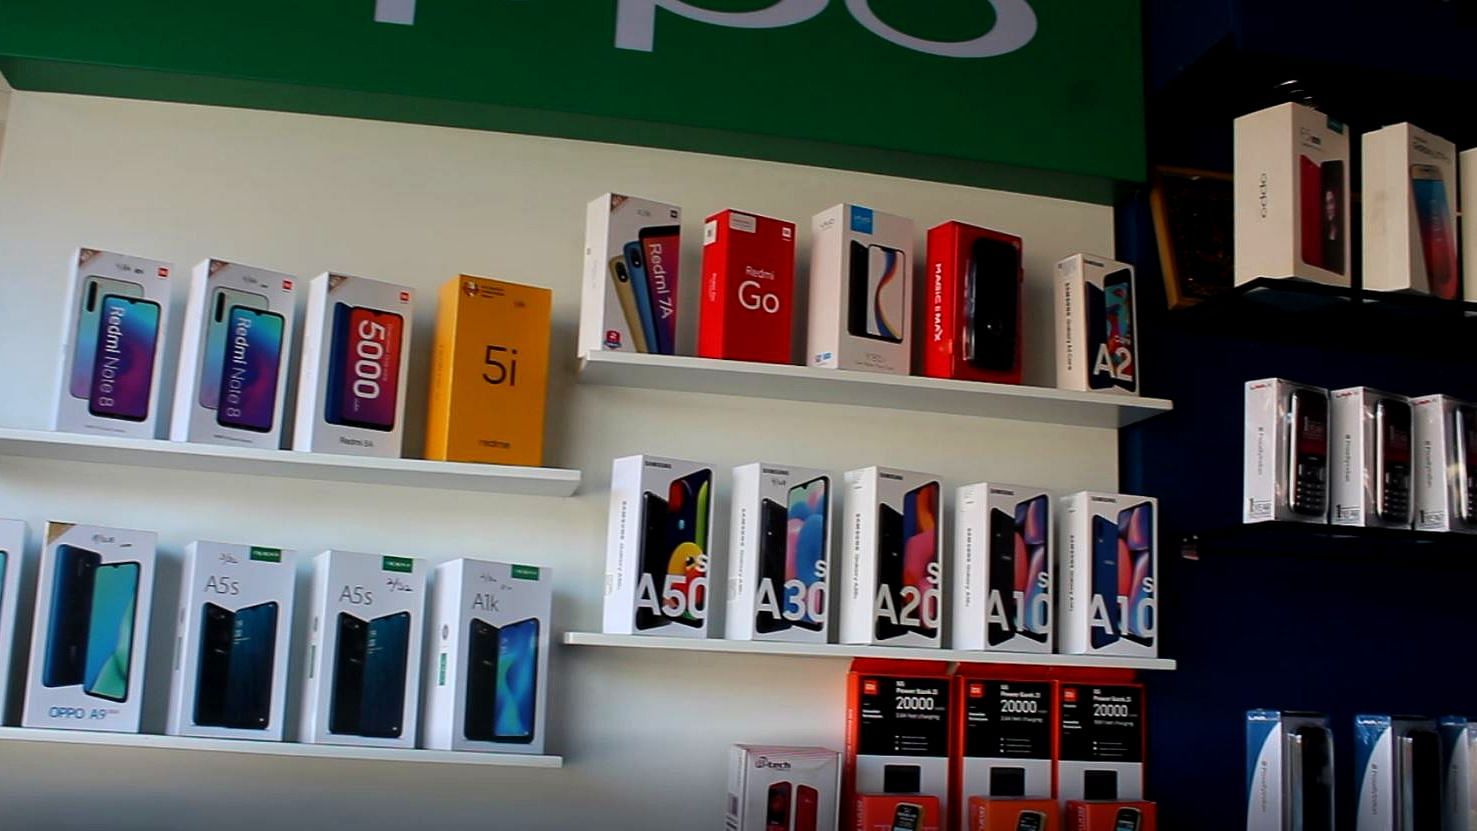 The economic slowdown has affected mobile phone sales in the past couple of months.